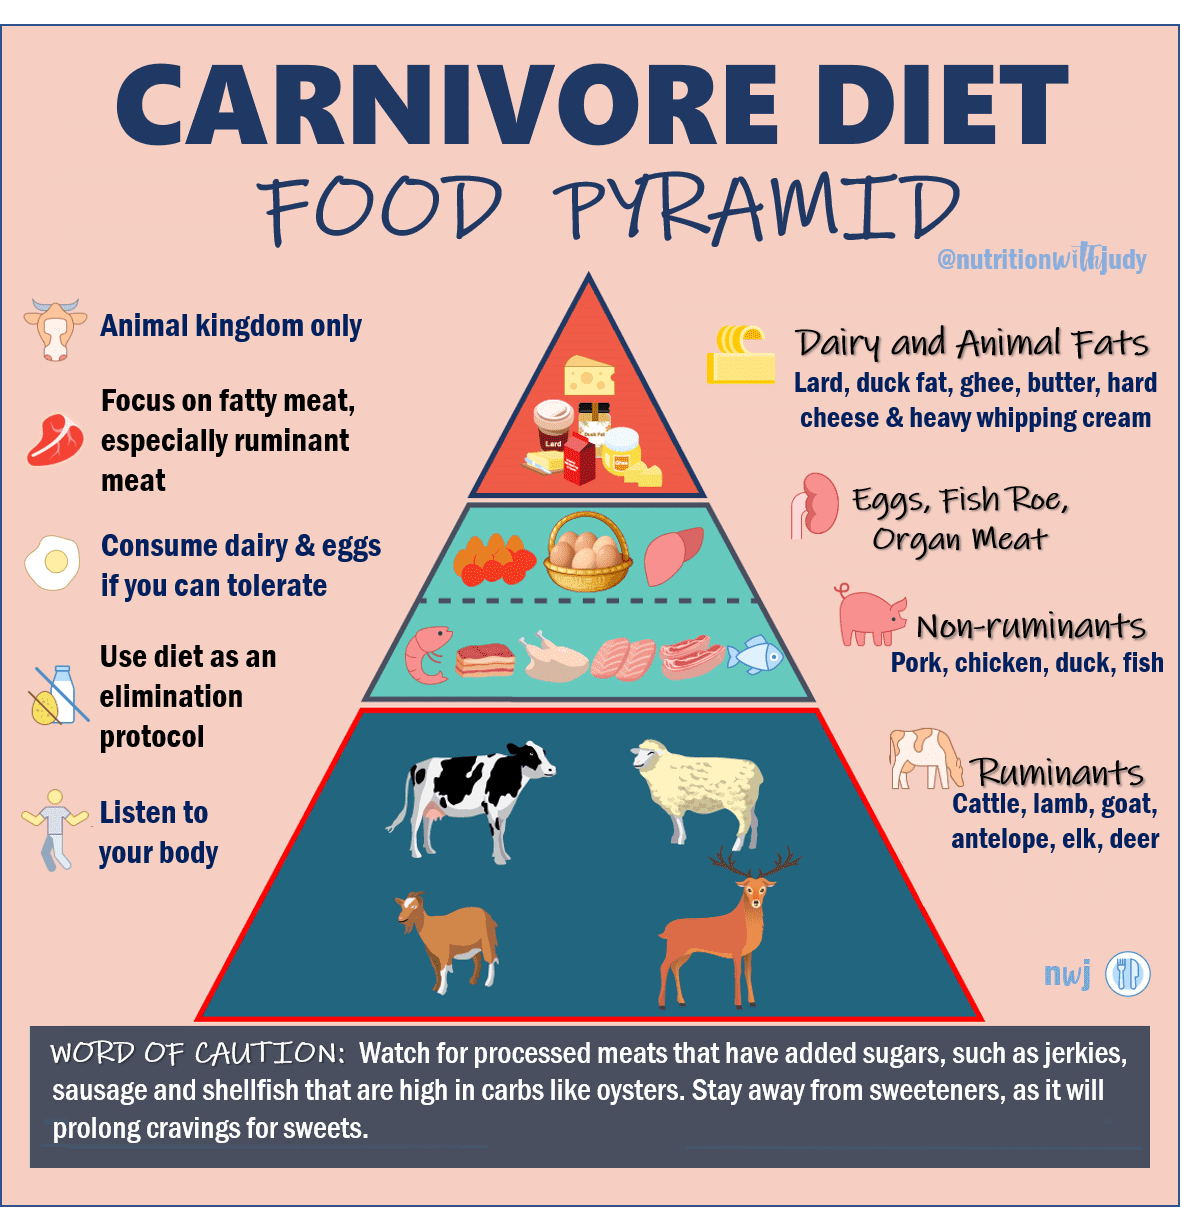 The Nutritionist’s Guide to the Carnivore Diet: A Beginner's Guide - Nutrition with Judy